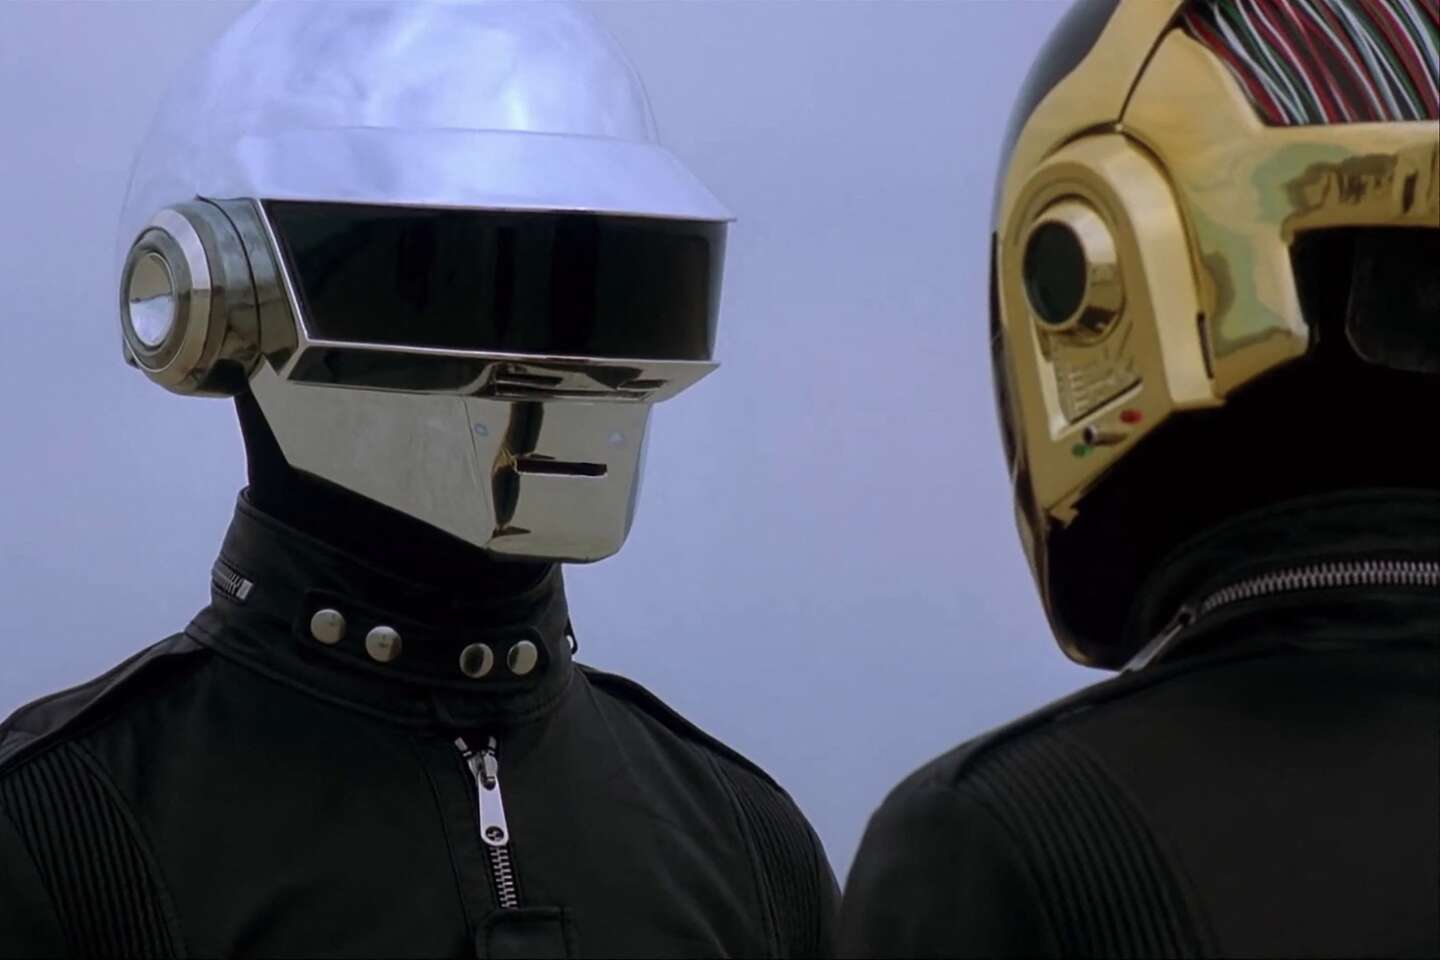 Daft Punk Sees Huge Streaming Surge After Breakup Announcement